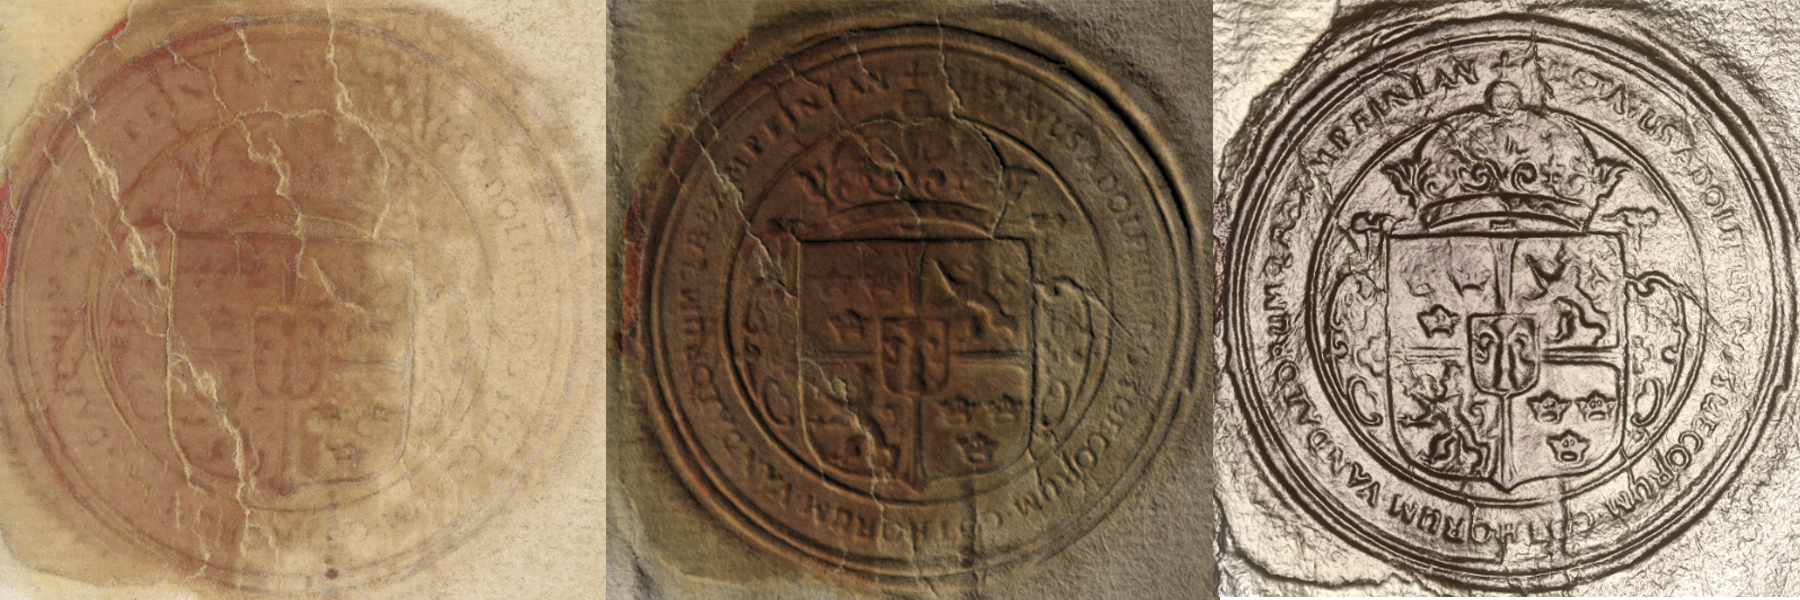 side-by-side close-up of seals showing different detail depending on the light enhancements